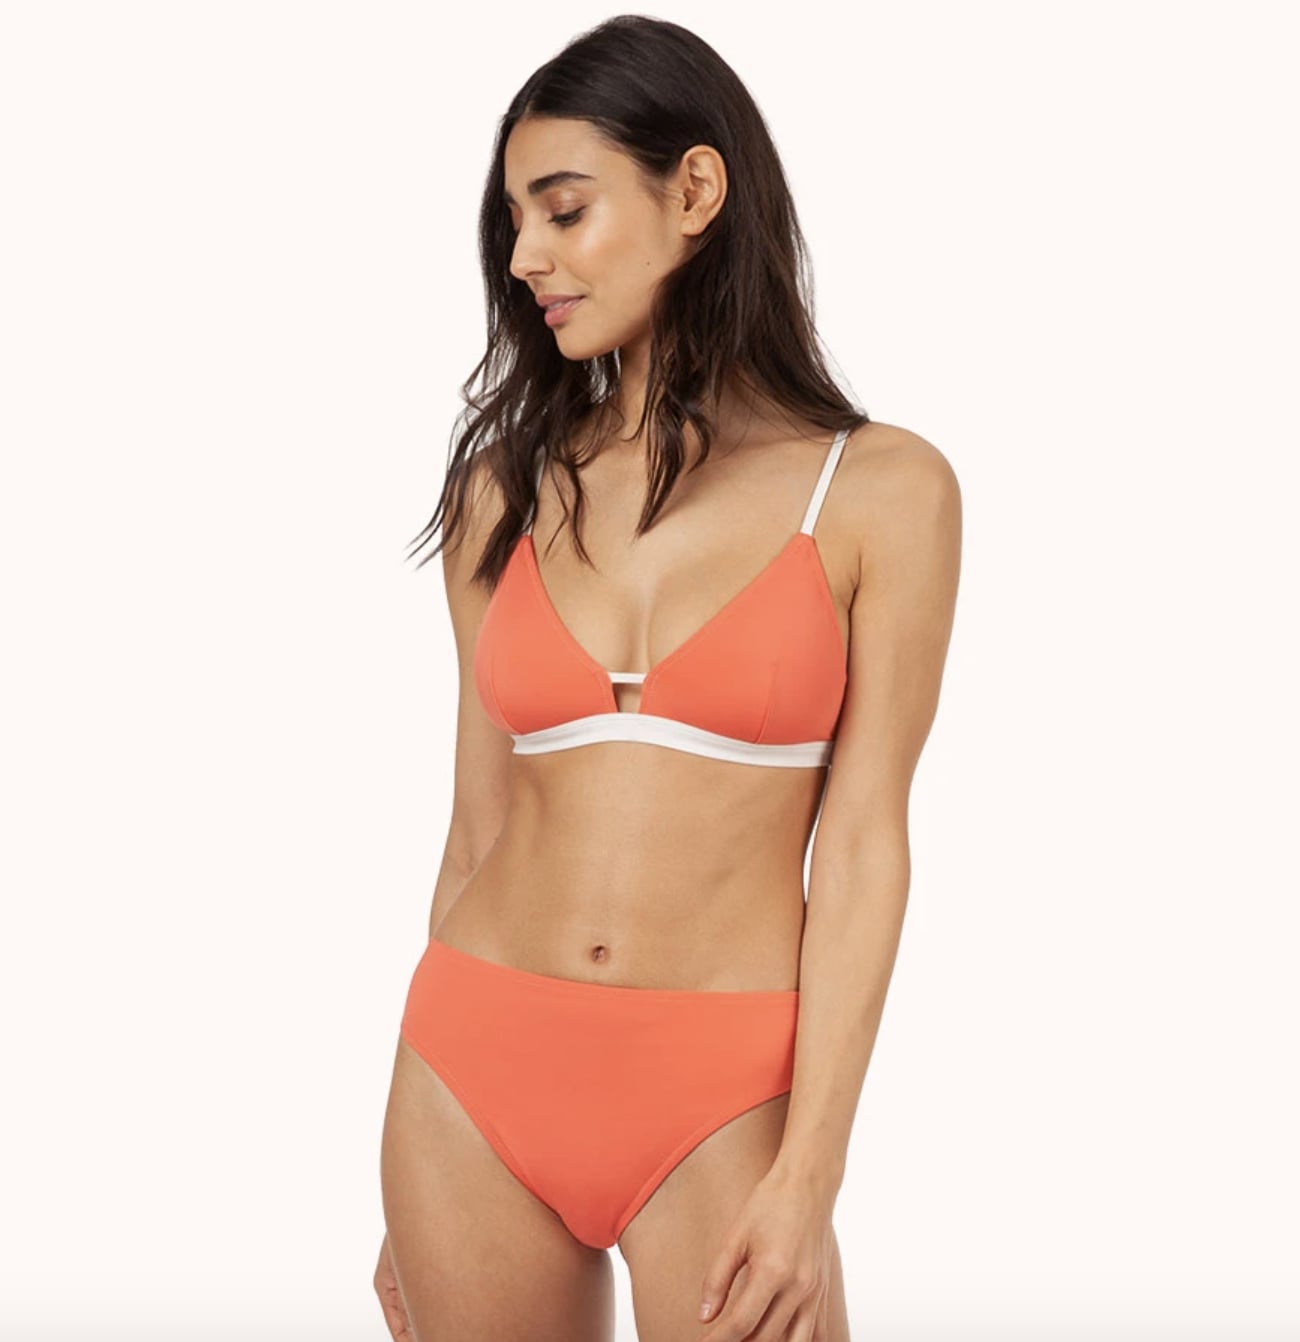 Lively Bralette Swim Top and High Waist Bikini Bottom, Your Favourite Bra  Brand Just Made Sustainable Swimwear and It's So Flattering